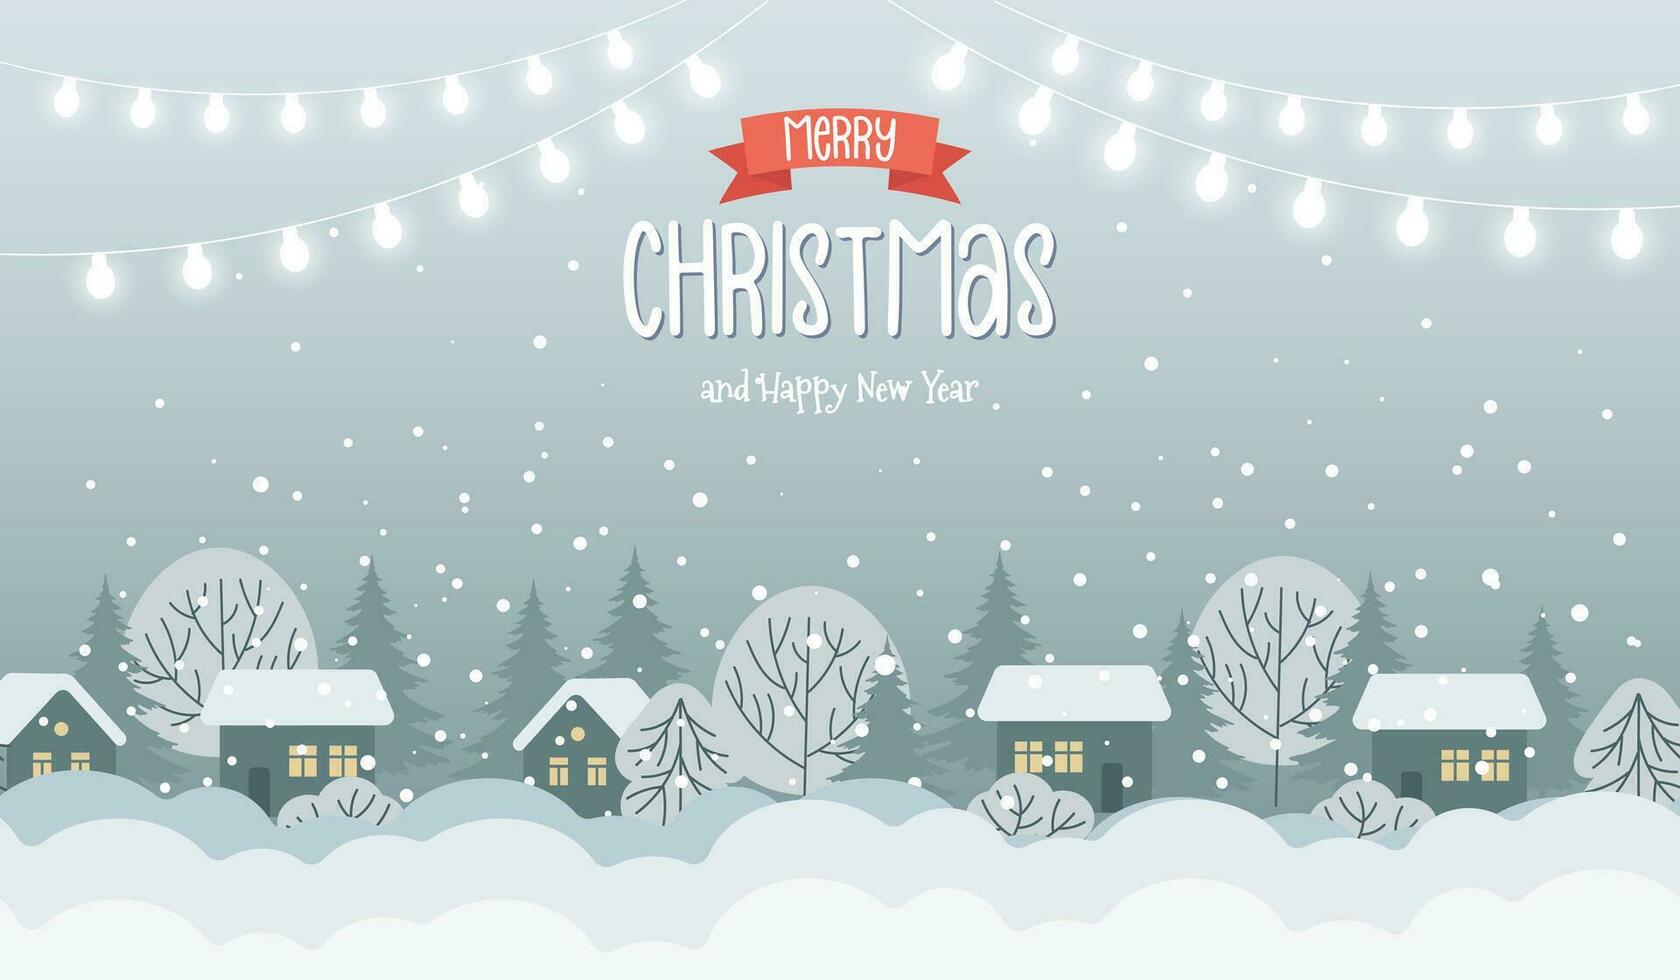 Winter landscape with cute houses, trees and holiday lights, Merry Christmas greeting card template. Illustration in flat style. Vector